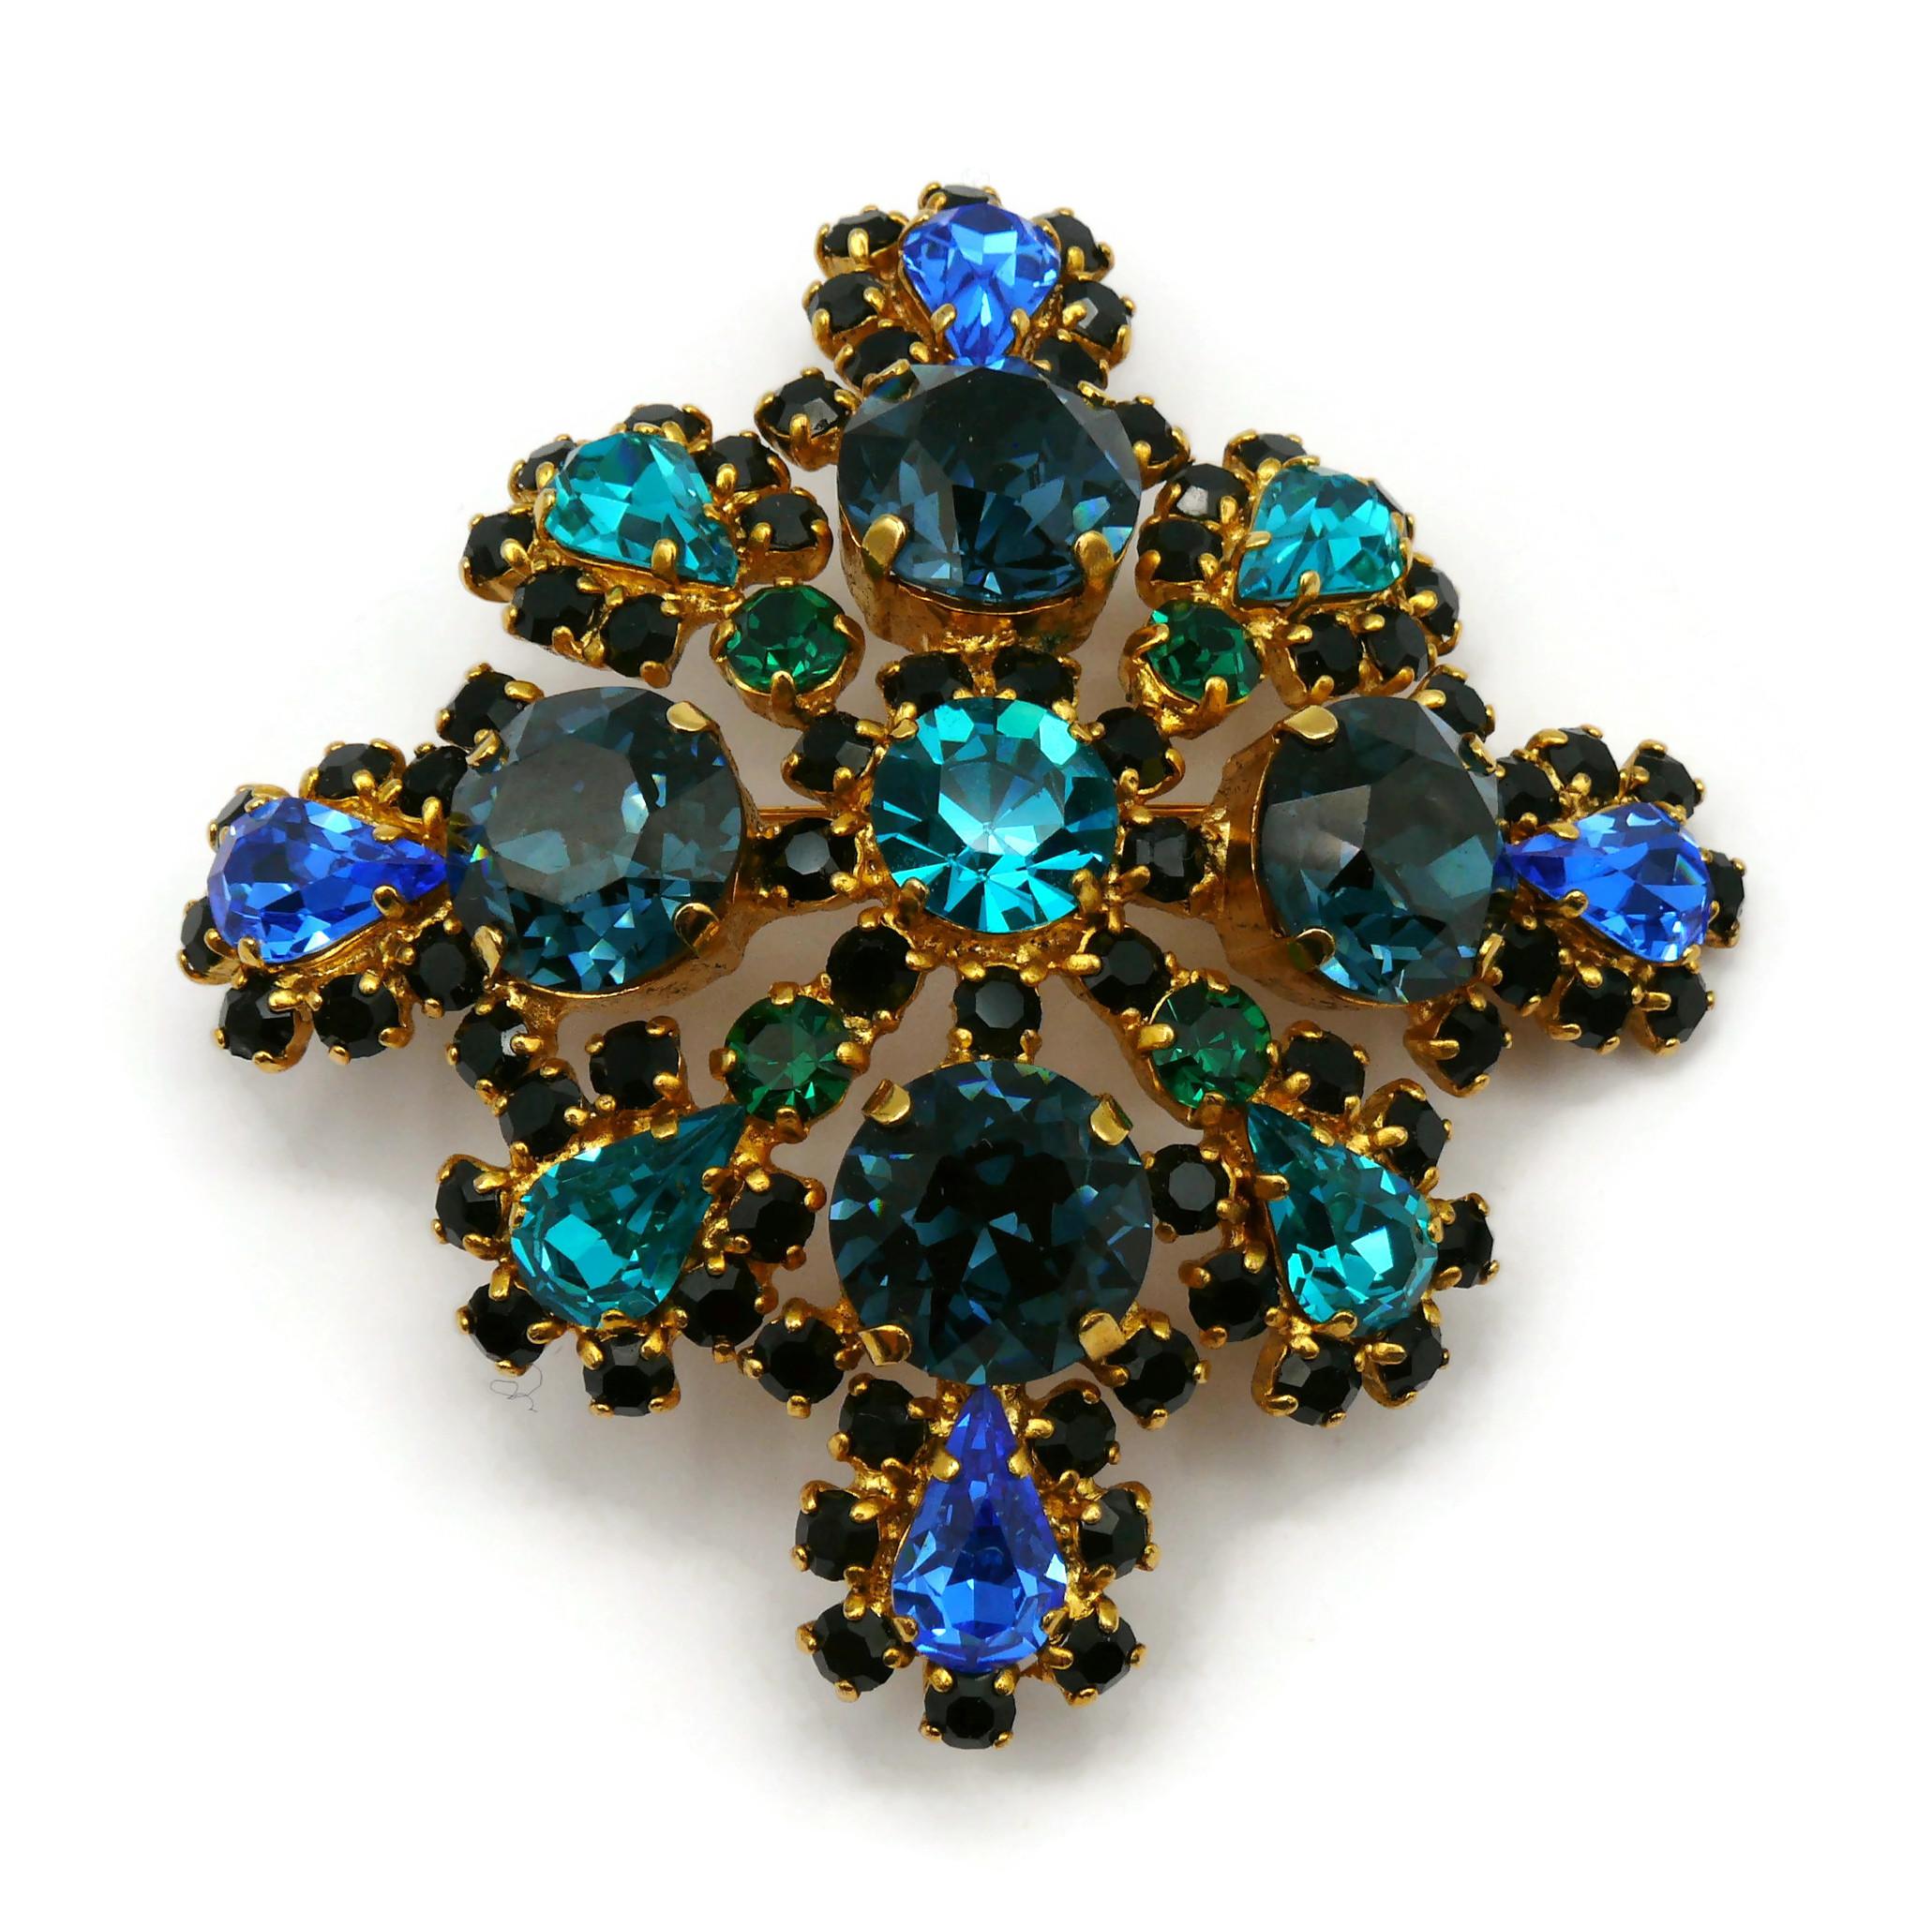 CHRISTIAN DIOR by GIANFRANCO FERRE Vintage Massive Jewelled Brooch Pendant For Sale 3